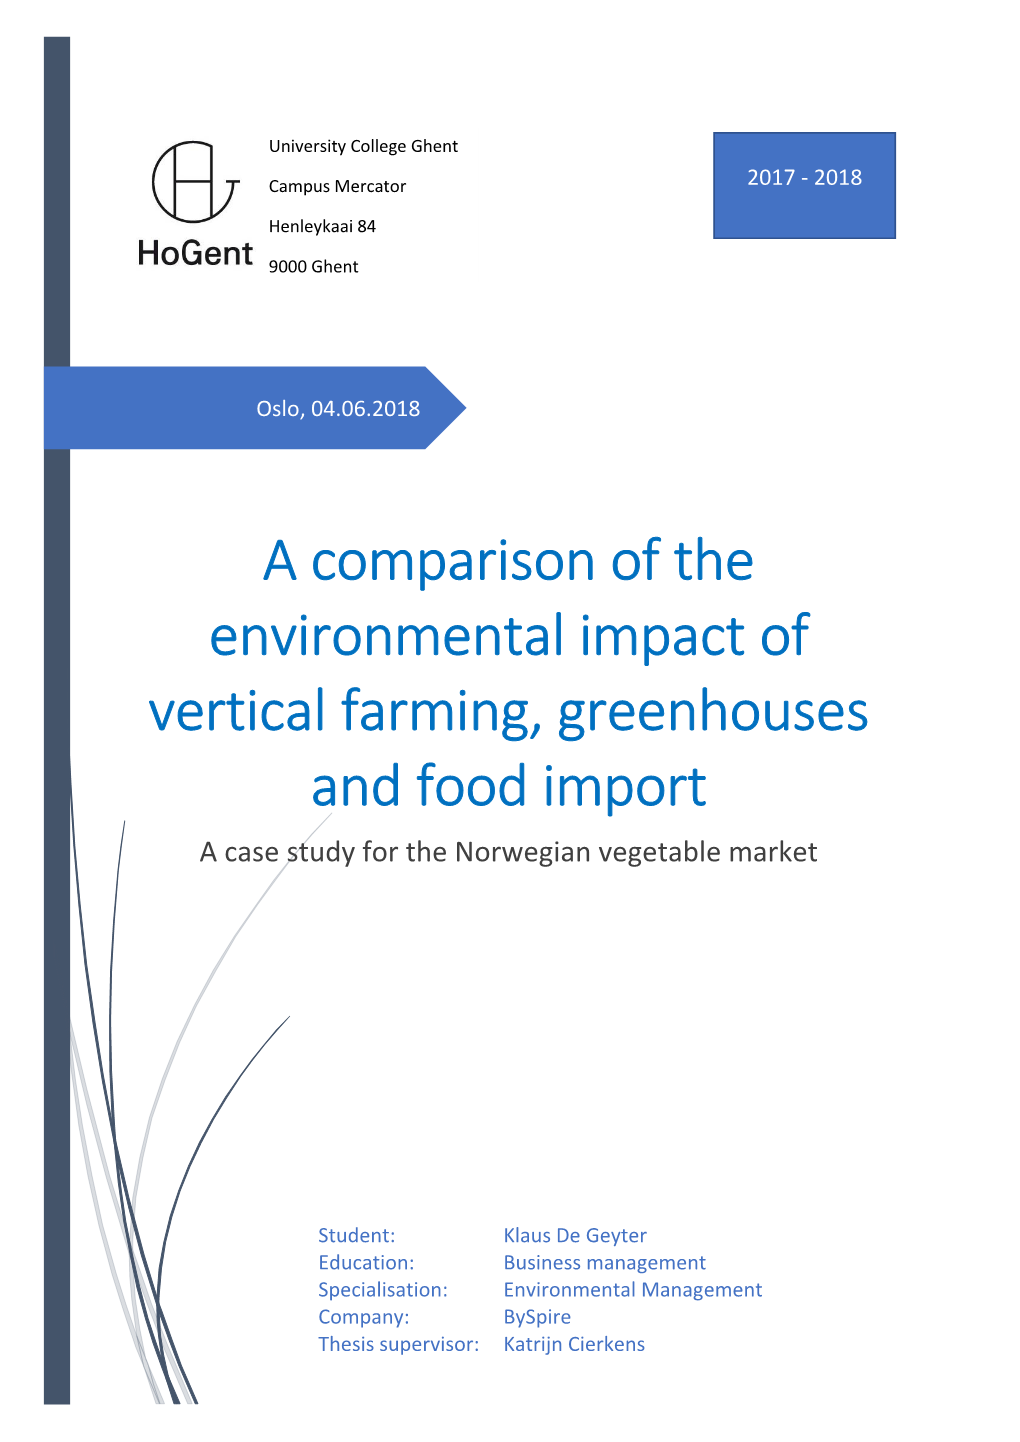 A Comparison of the Environmental Impact of Vertical Farming, Greenhouses and Food Import a Case Study for the Norwegian Vegetable Market